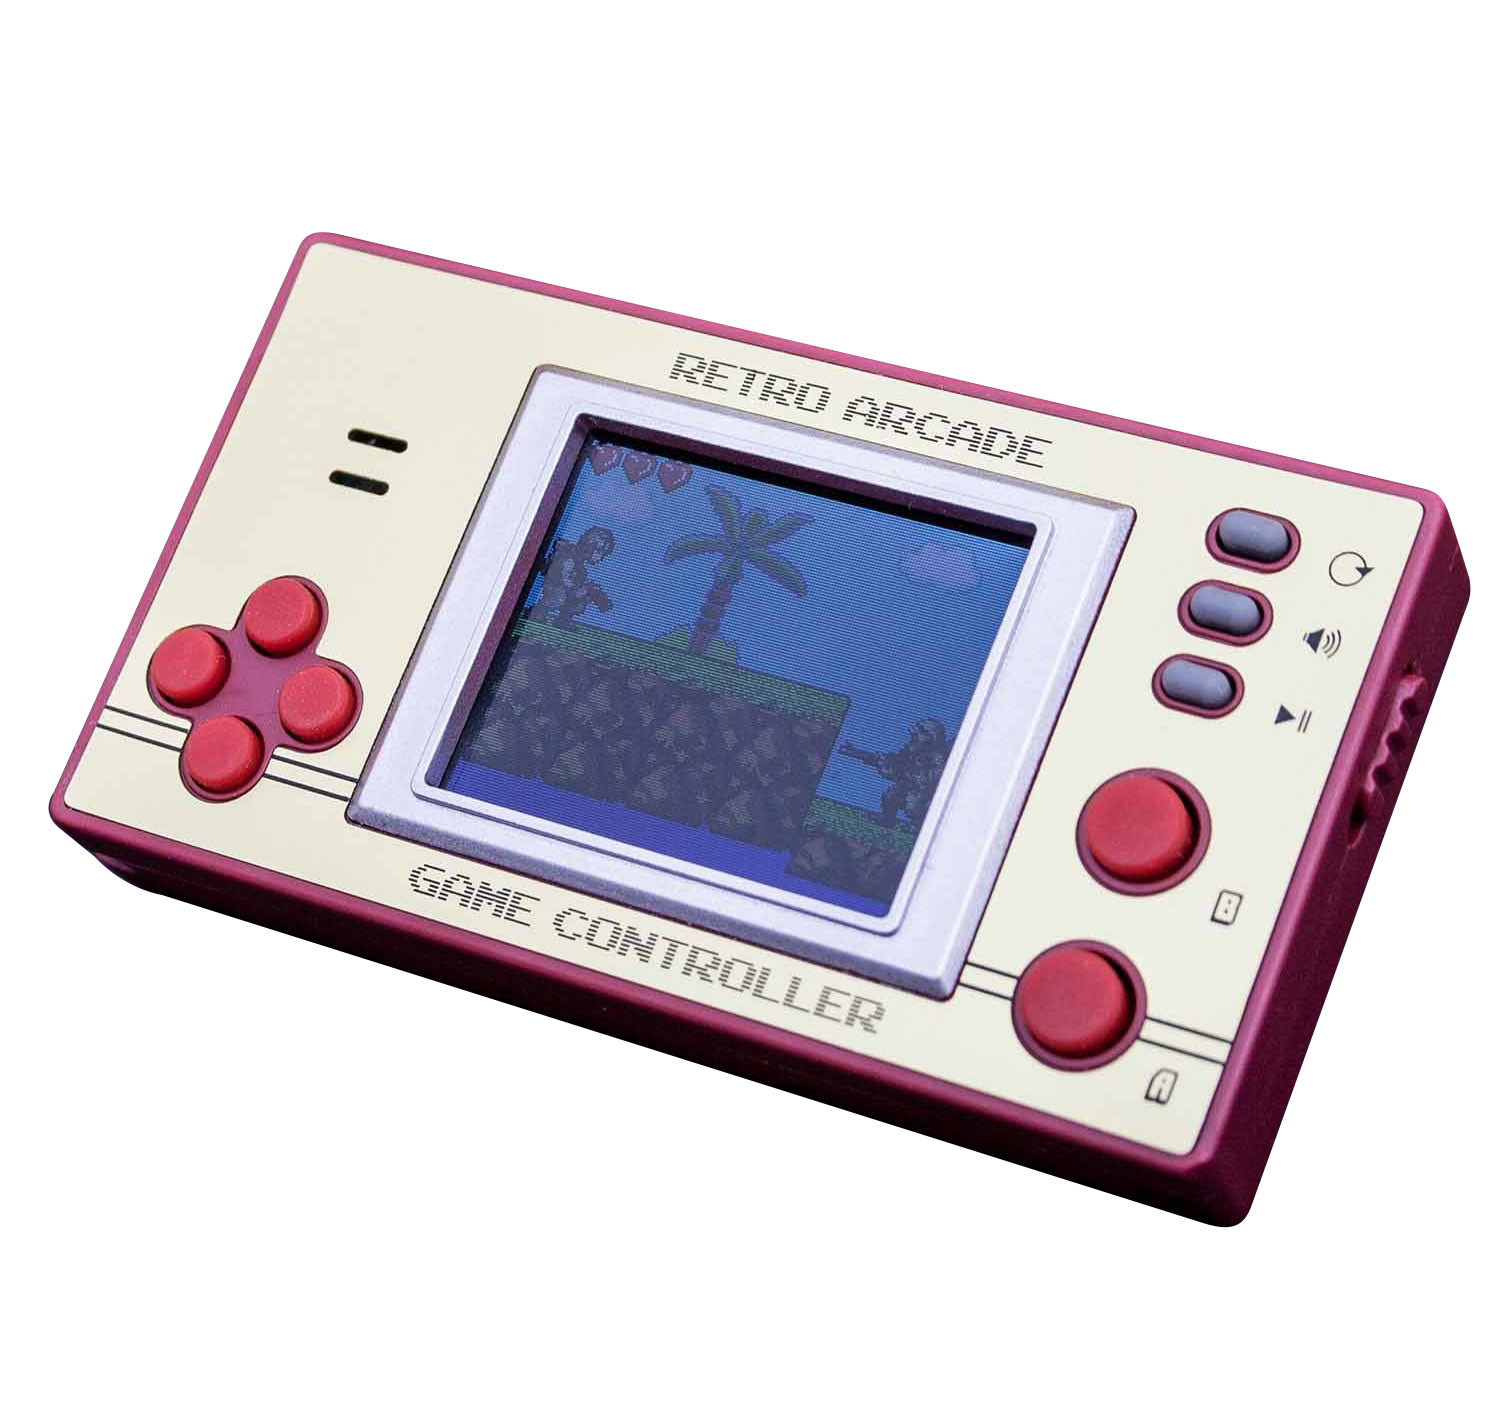 https://content.pearl.fr/media/cache/default/article_ultralarge_high_nocrop/shared/images/articles/K/KT8/mini-console-portable-retro-arcade-game-controller-ref_KT8333_3.jpg